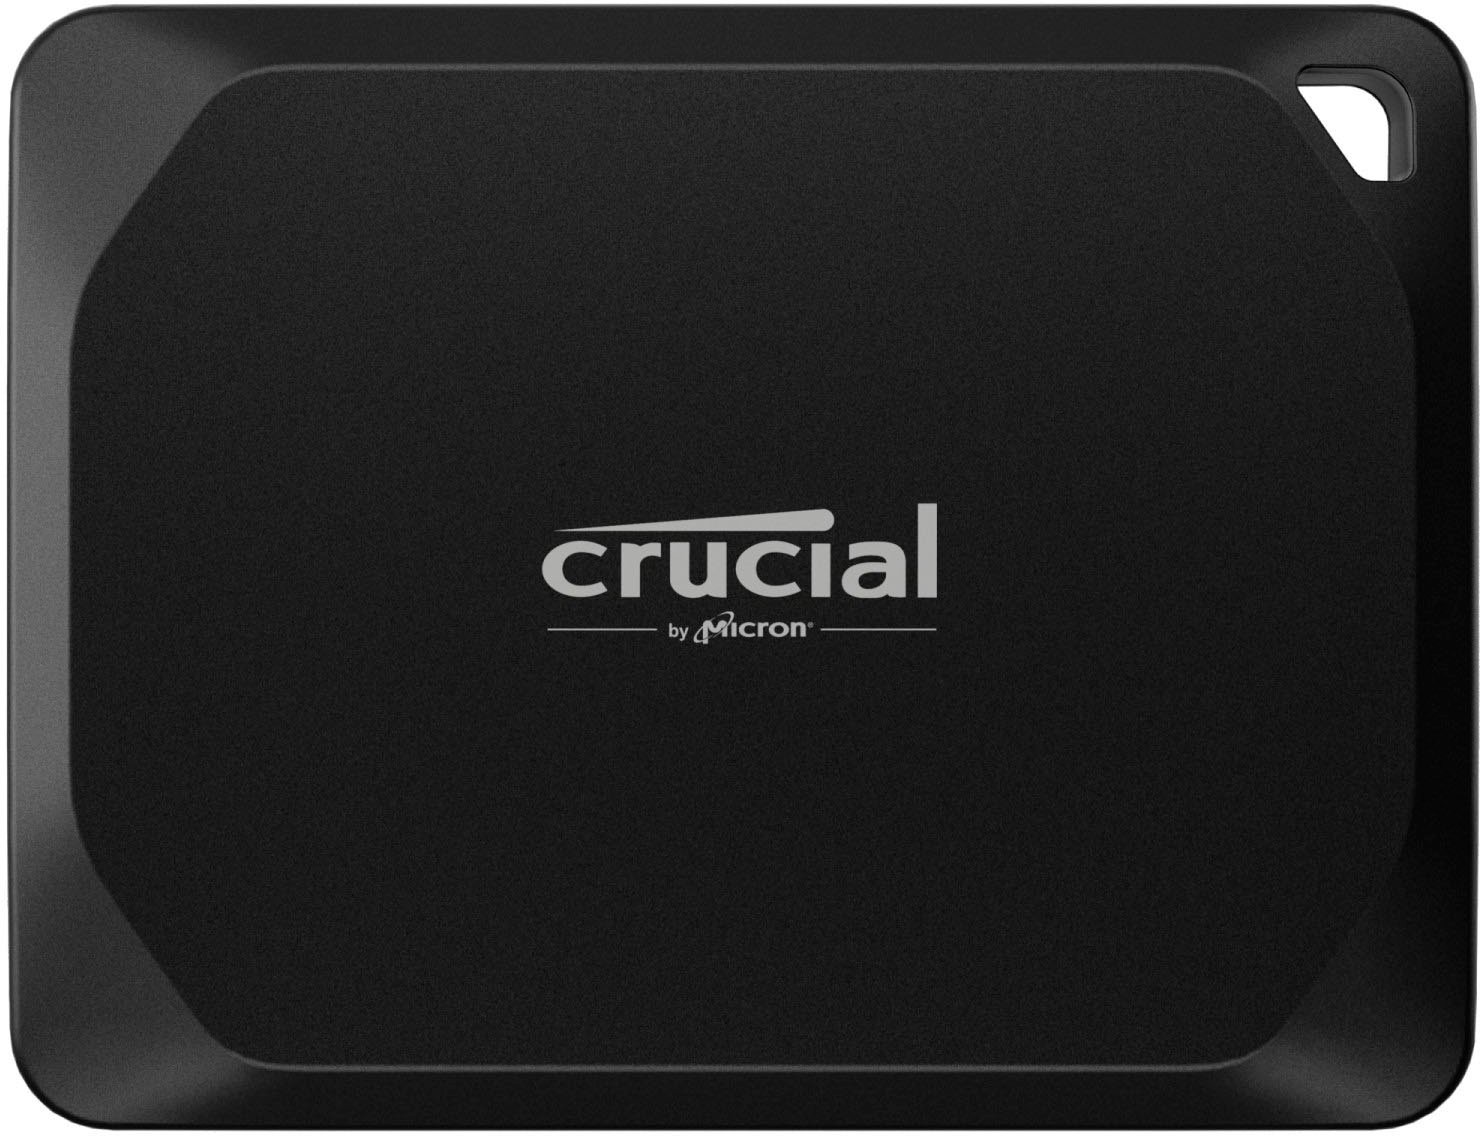 7 reasons why the new Crucial X10 Pro should be your…